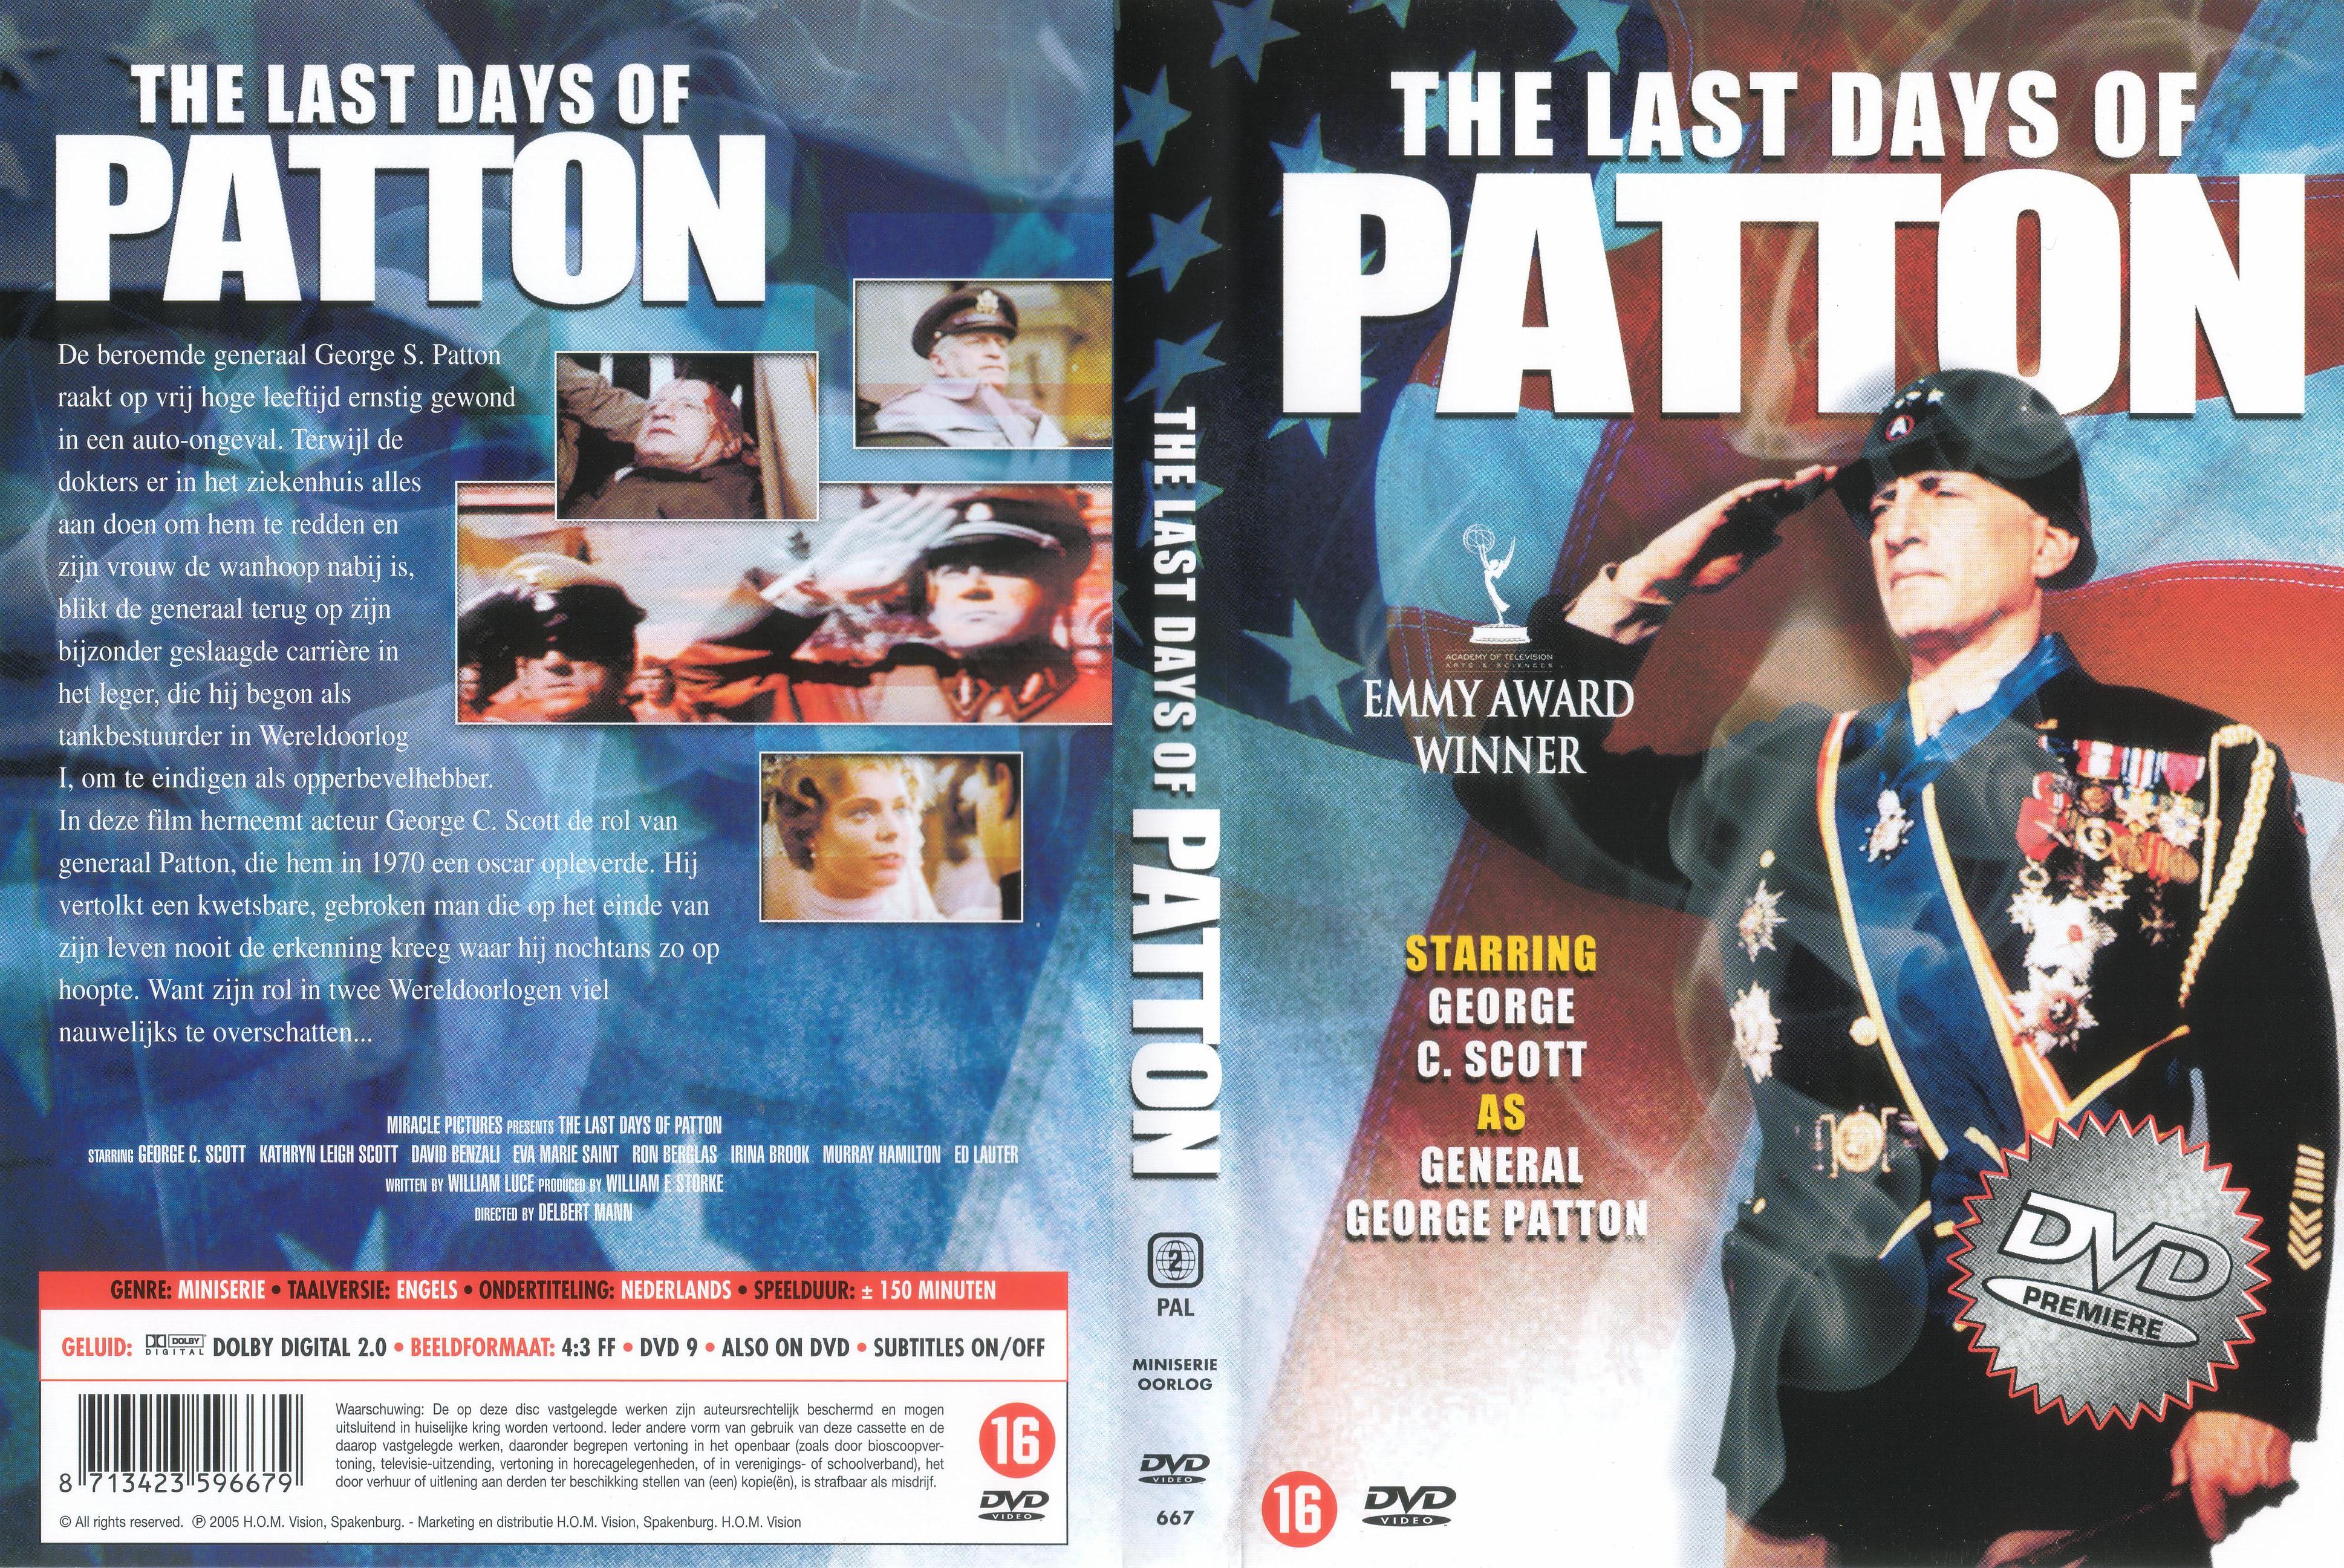 The last days of patton 1986